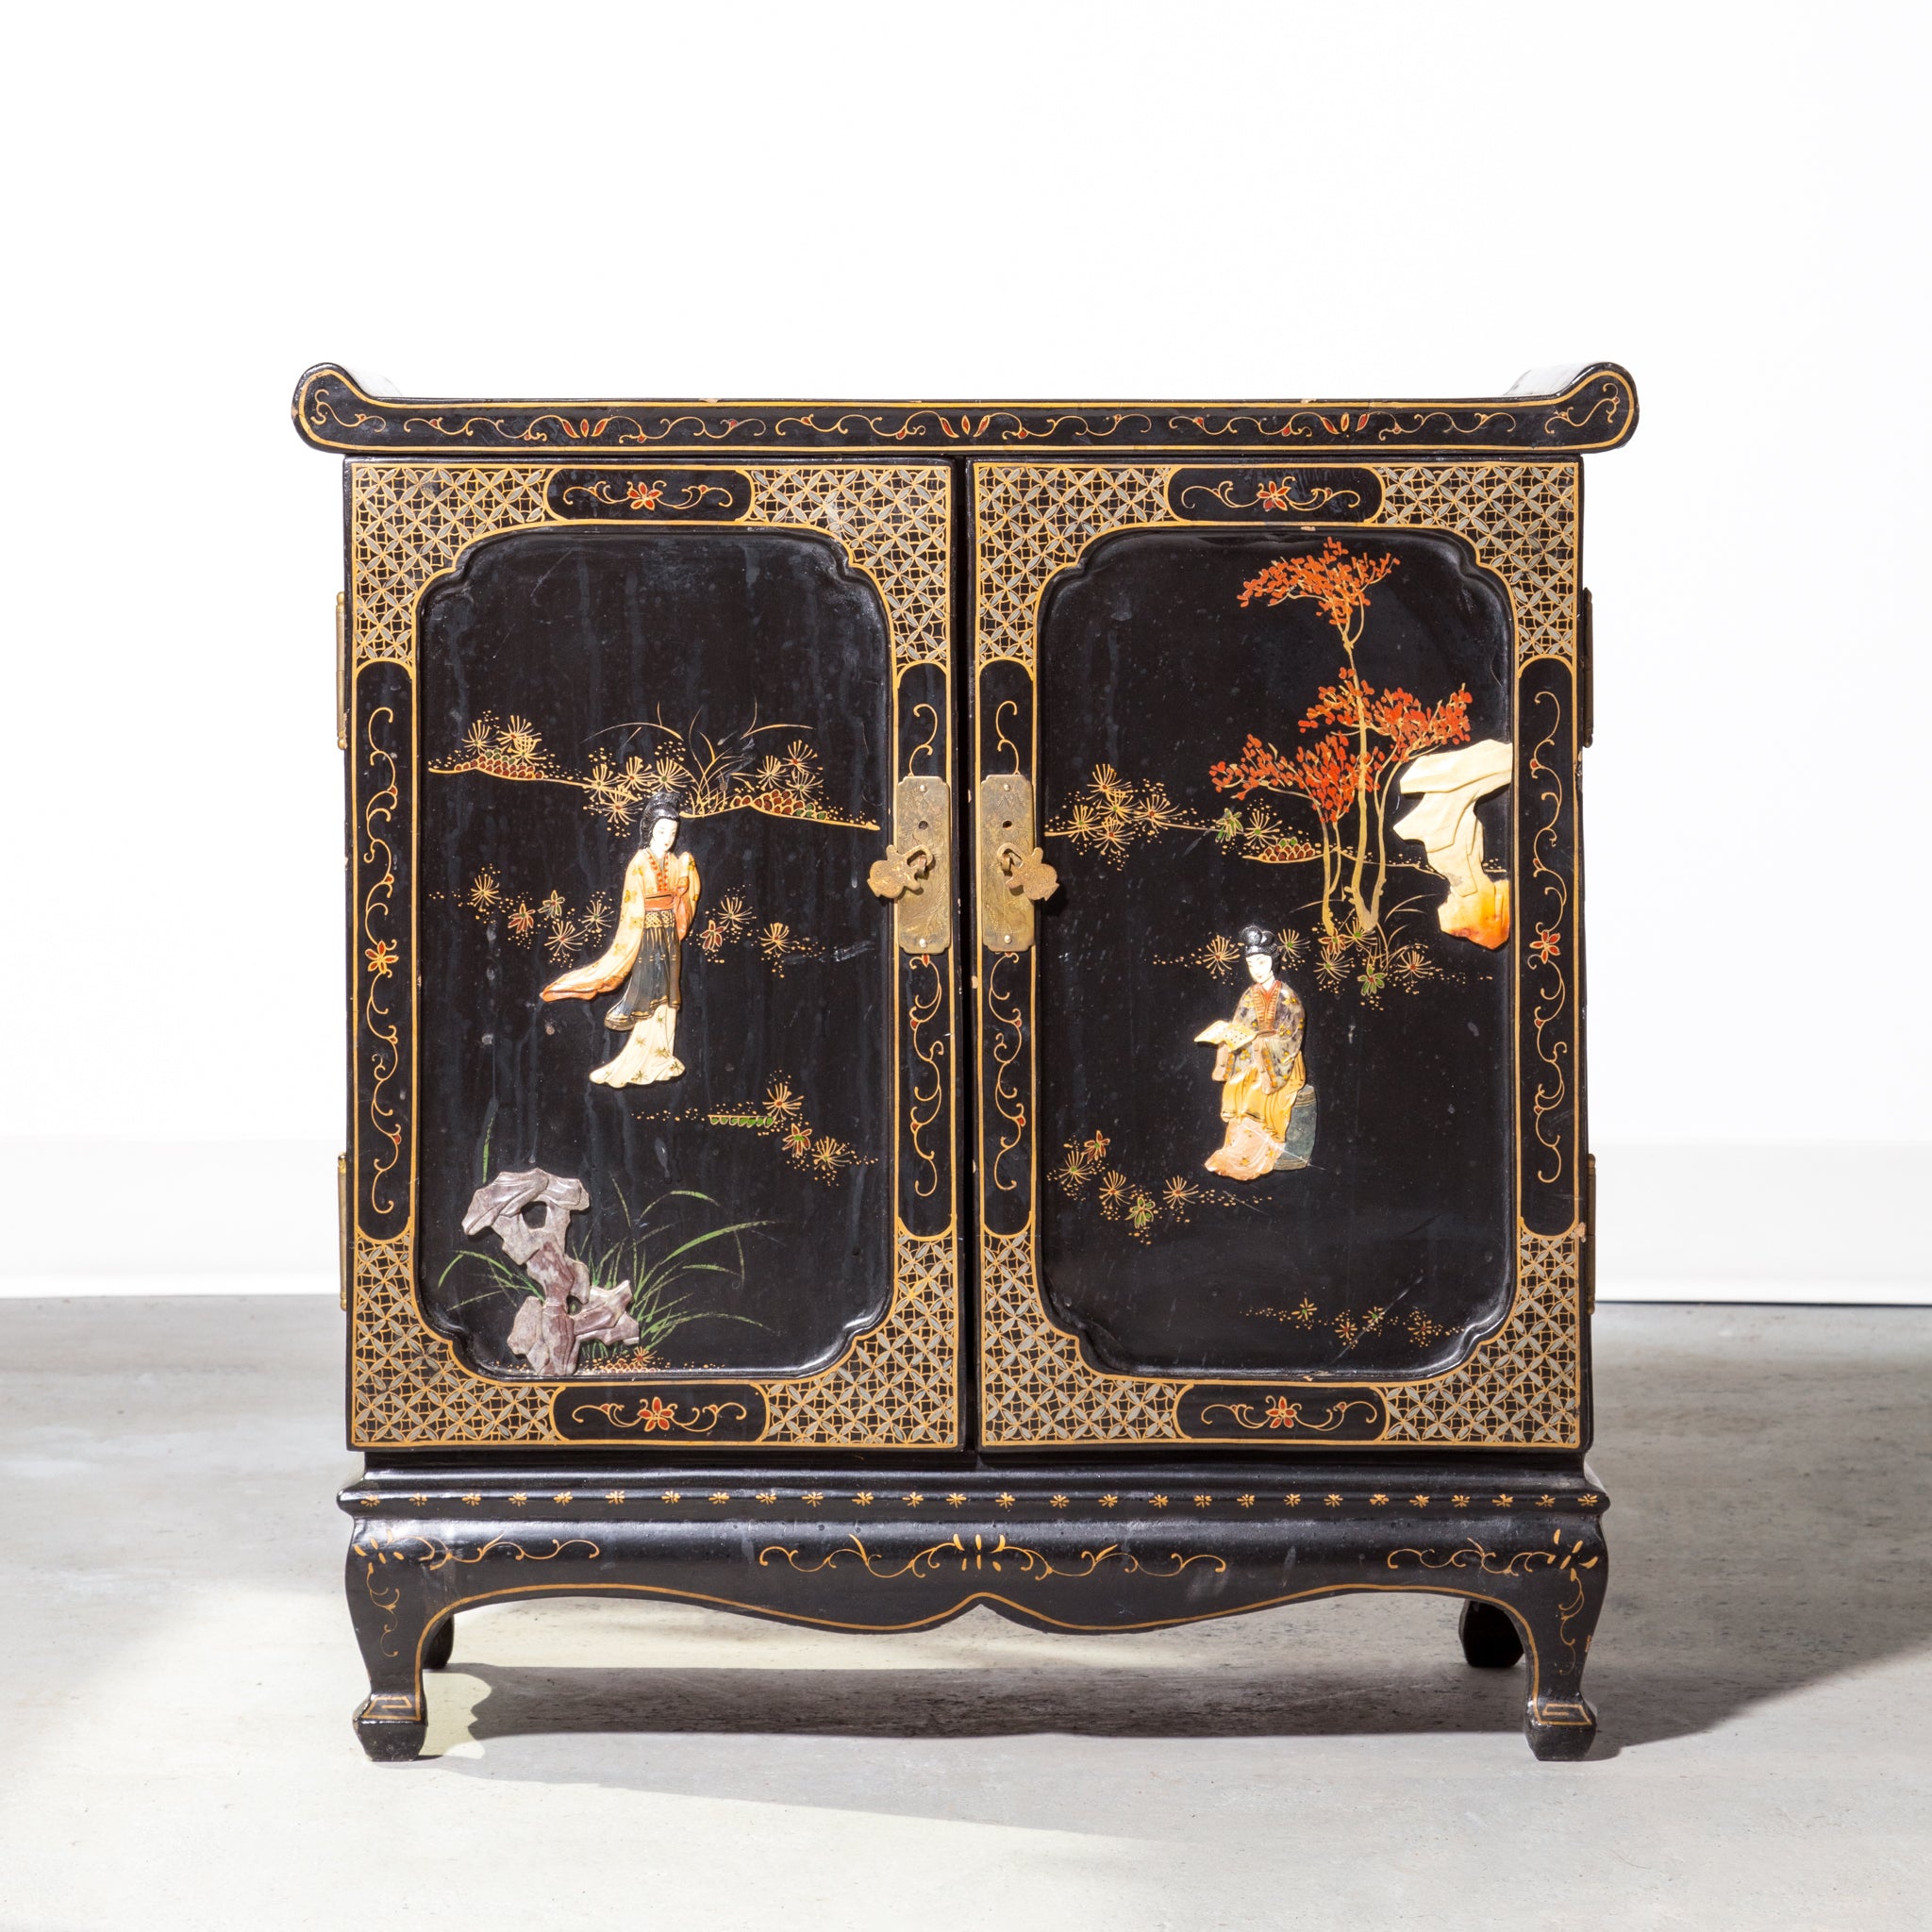 Exquisite Vintage Chinese Lacquer and Soapstone Cabinet